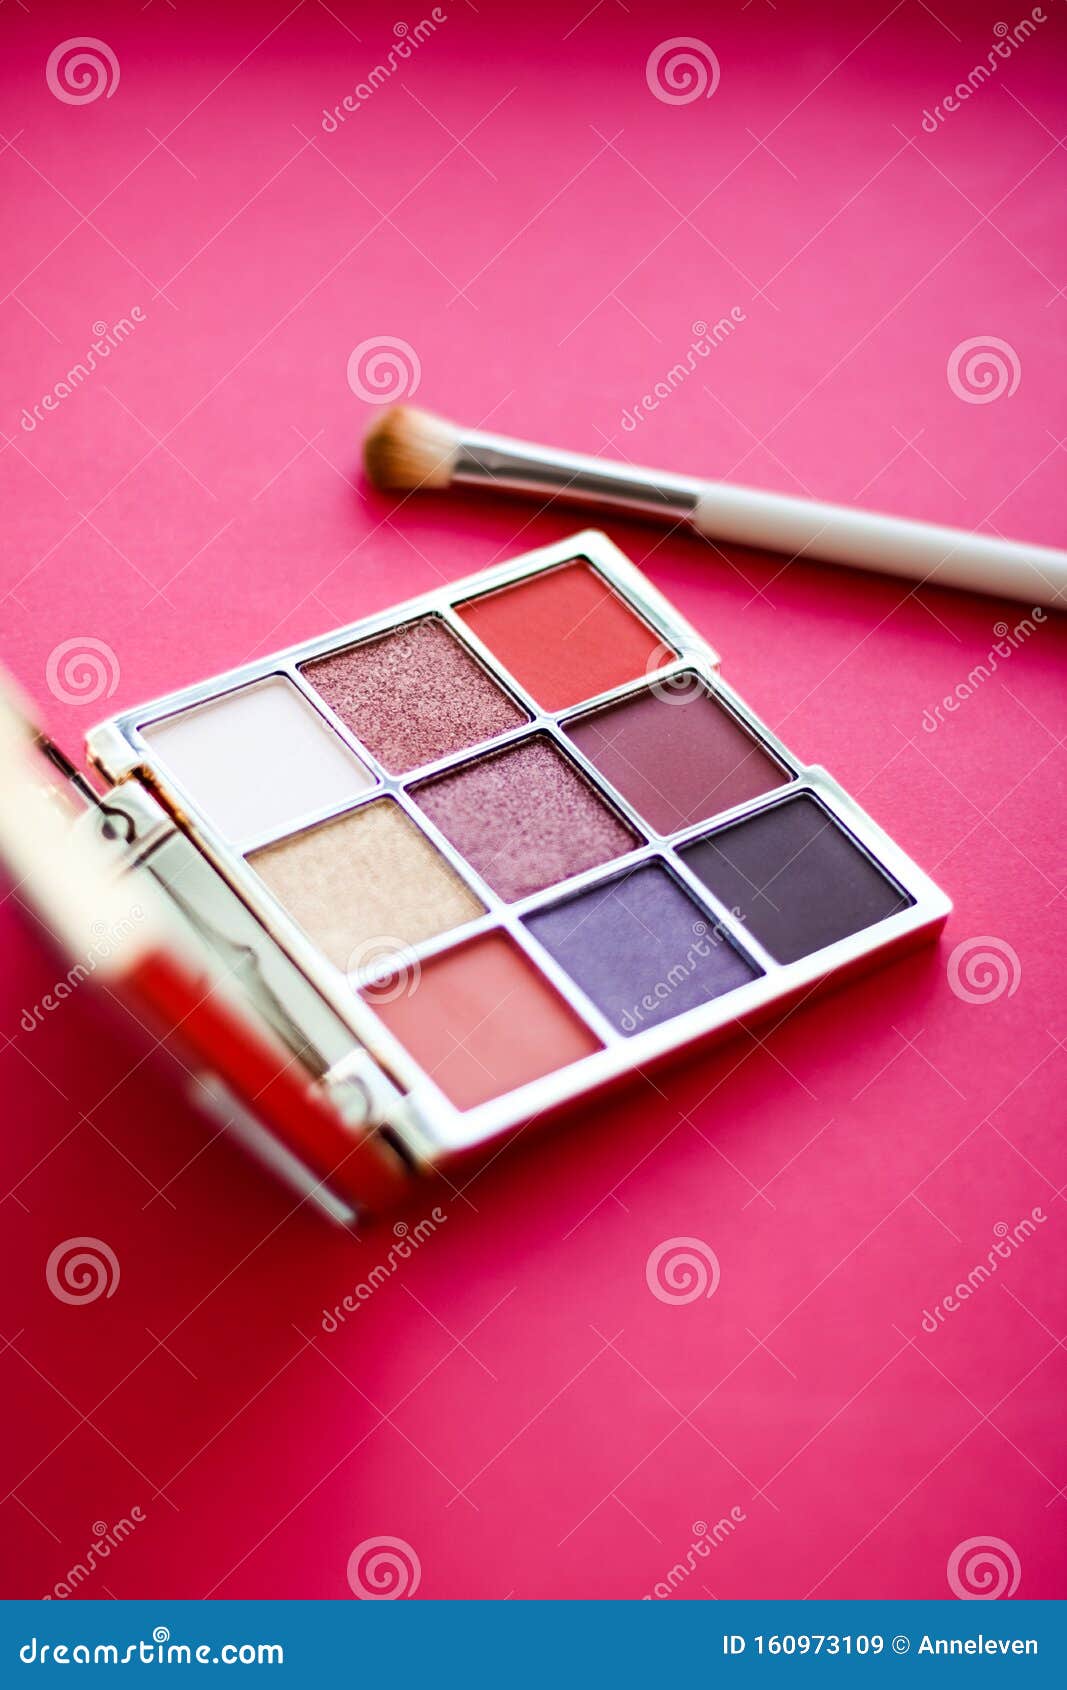 Eyeshadow Palette and Make-up Brush on Red Background, Eye Shadows ...